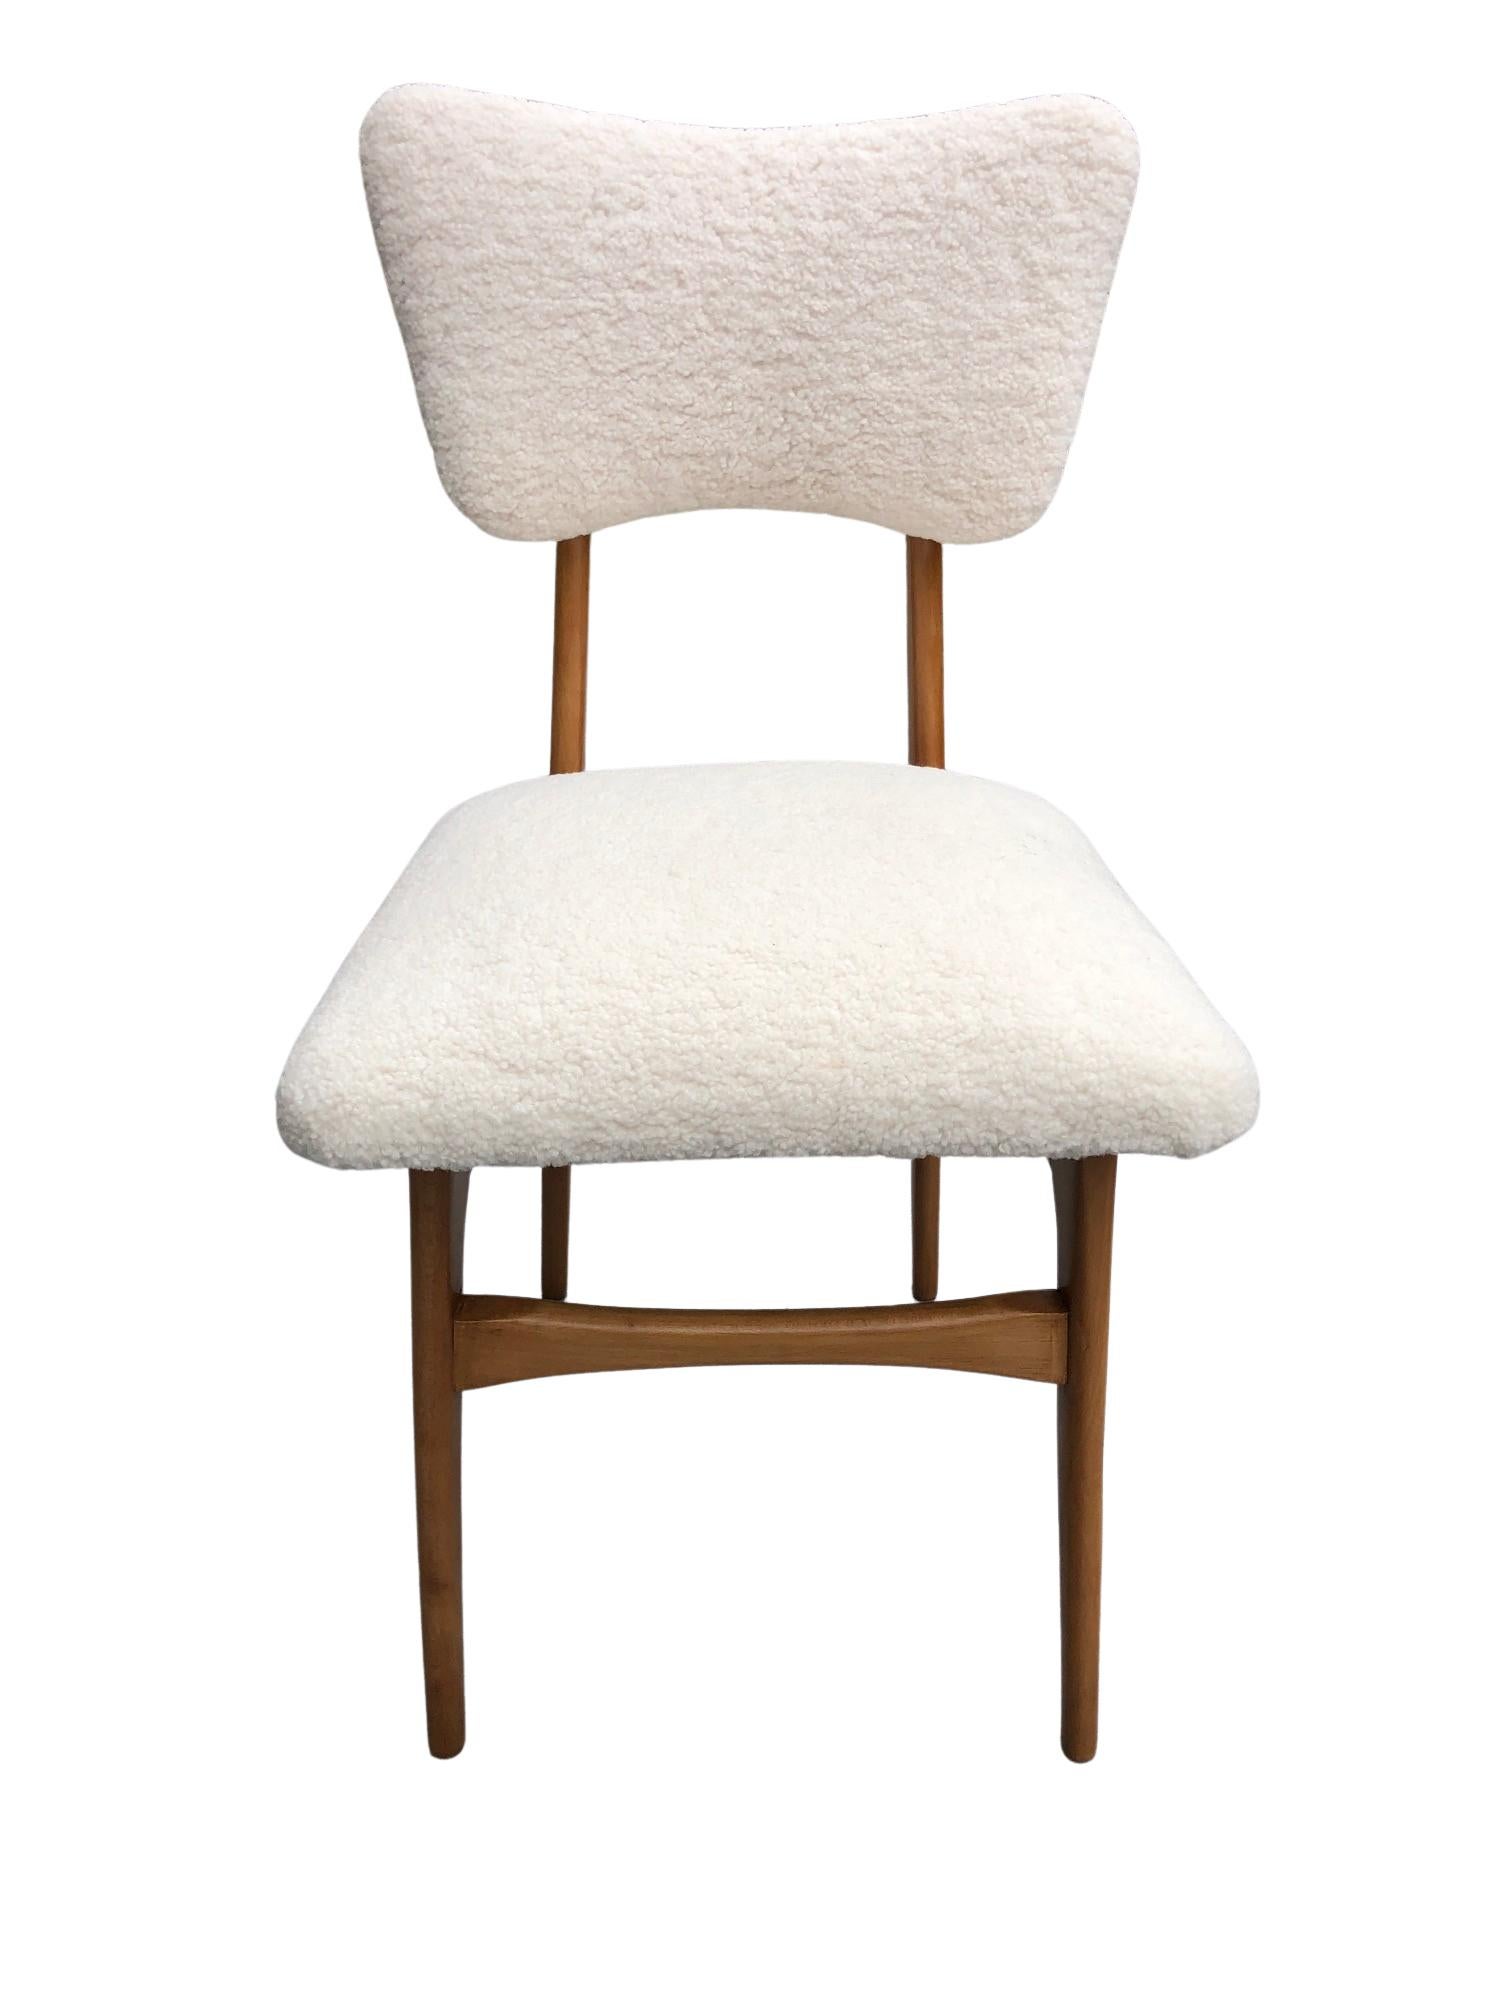 Unique set of two chairs manufactured in Poland in the 1960s, designed by Rajmund Halas. 

The upholstery is made of pleasant to touch boucle textile. It is high quality and durable italian fabric in a warm light beige color. The chair structure